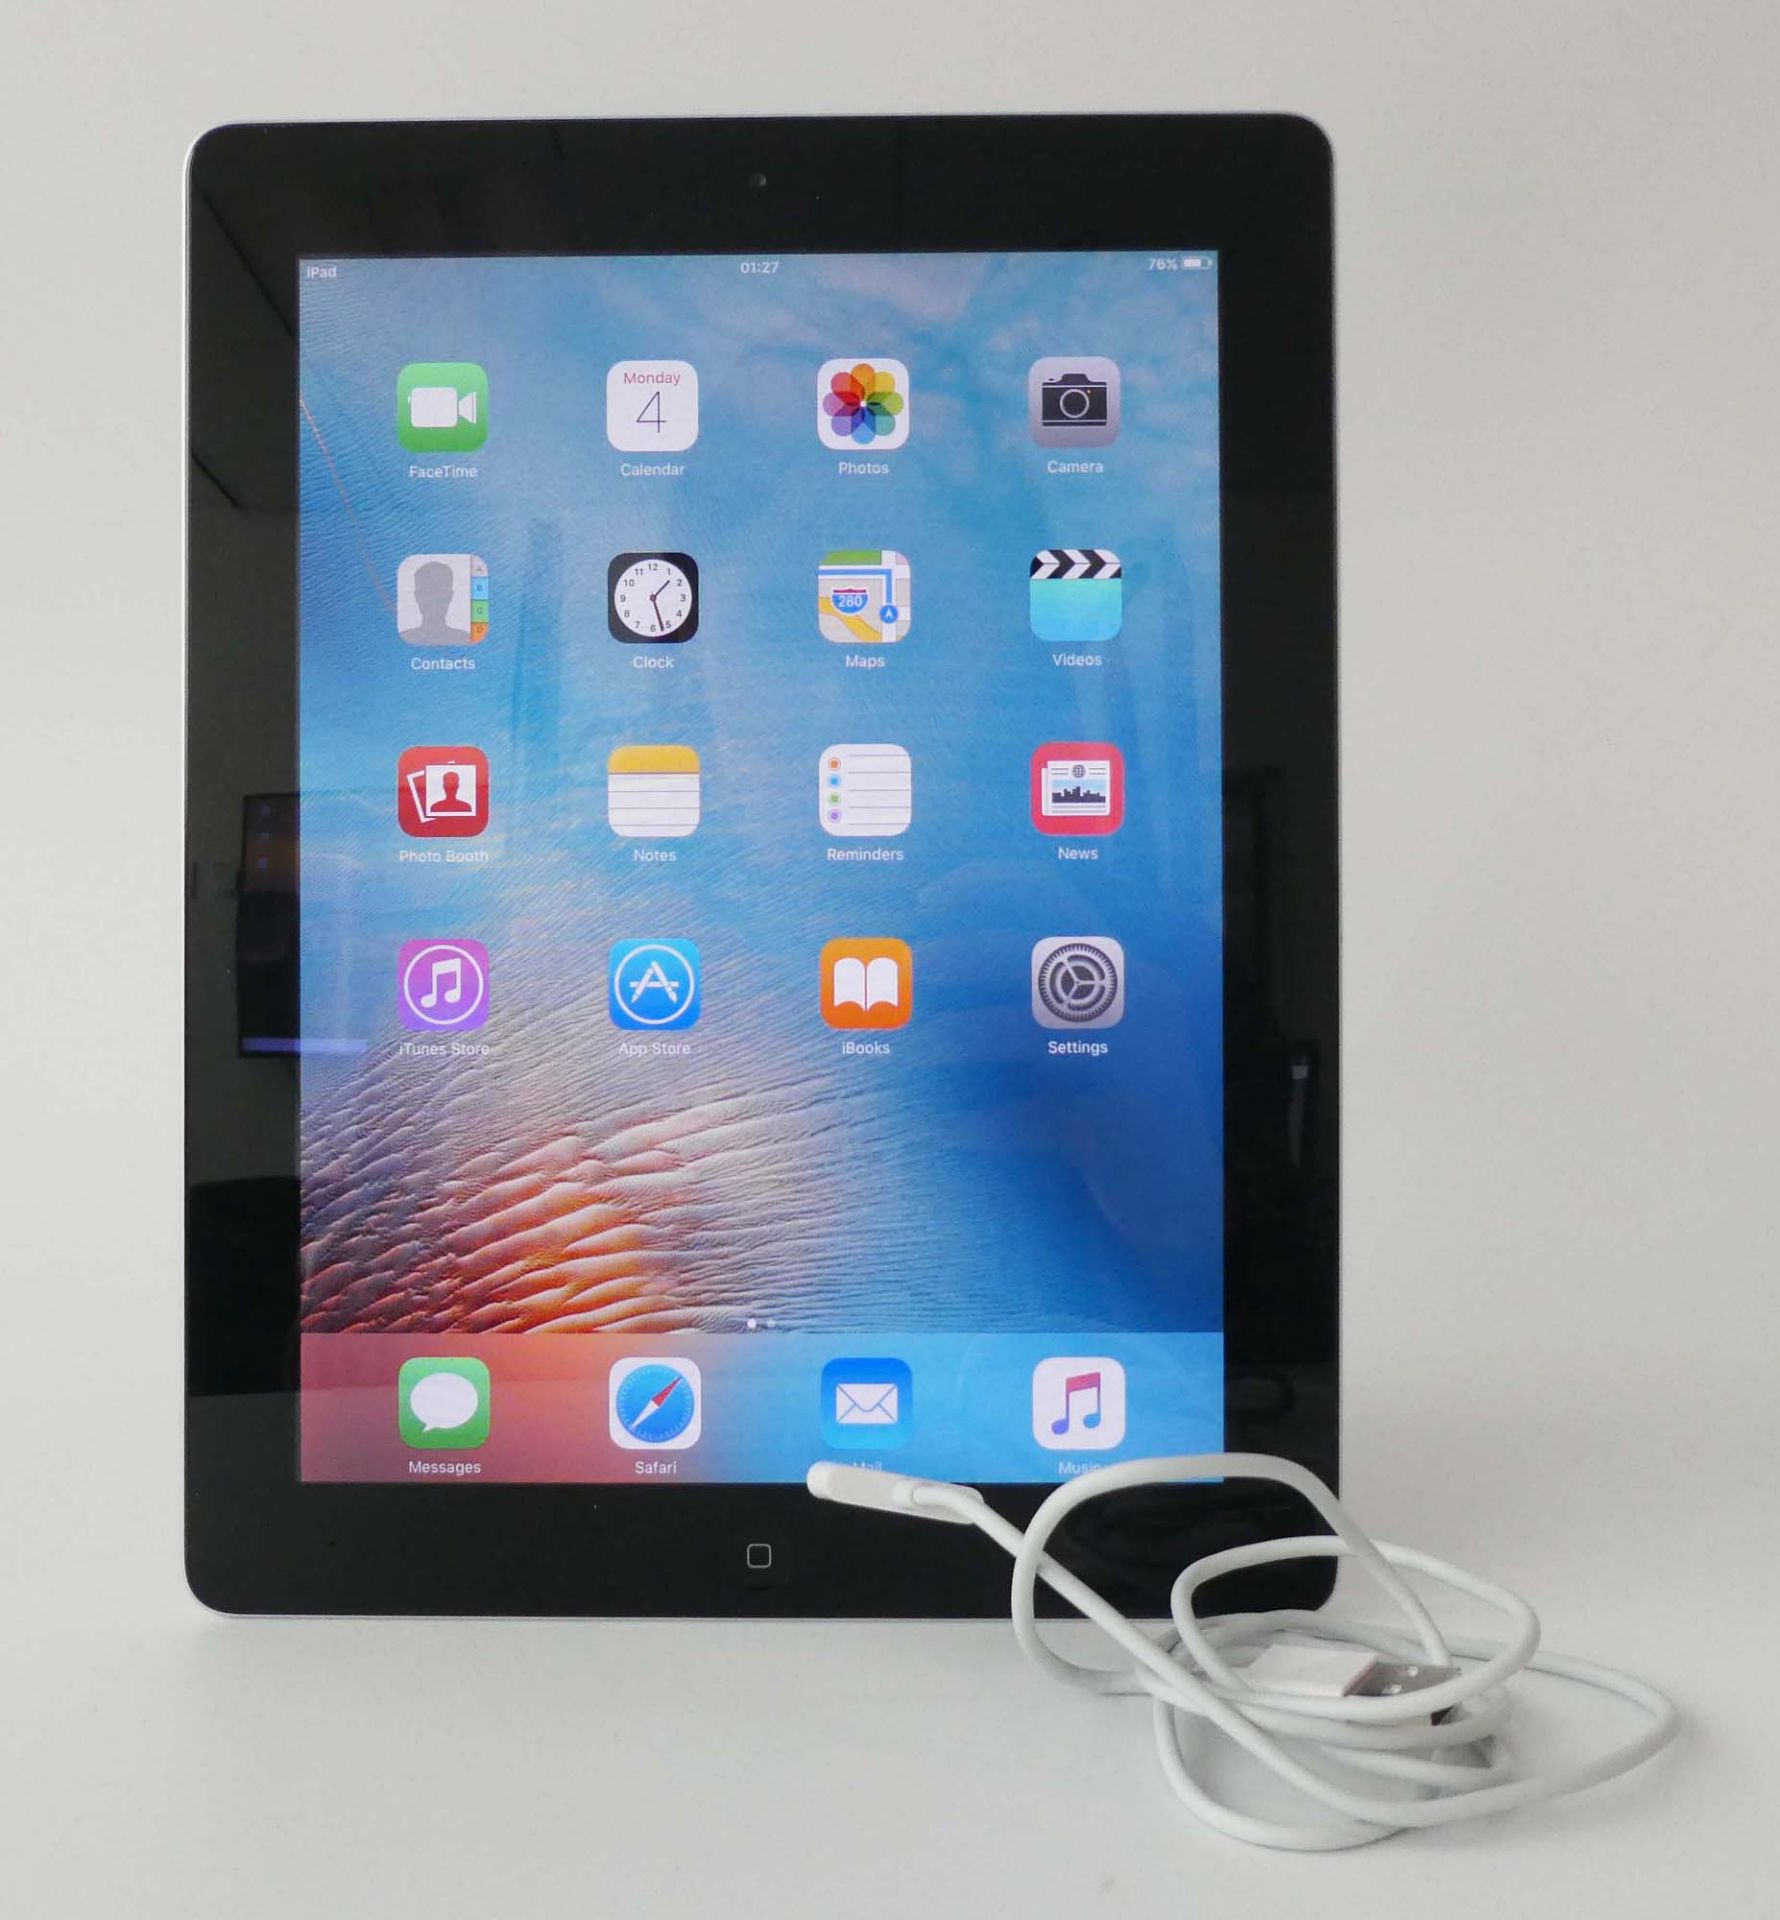 iPad A1395 16GB Silver tablet with charging cable